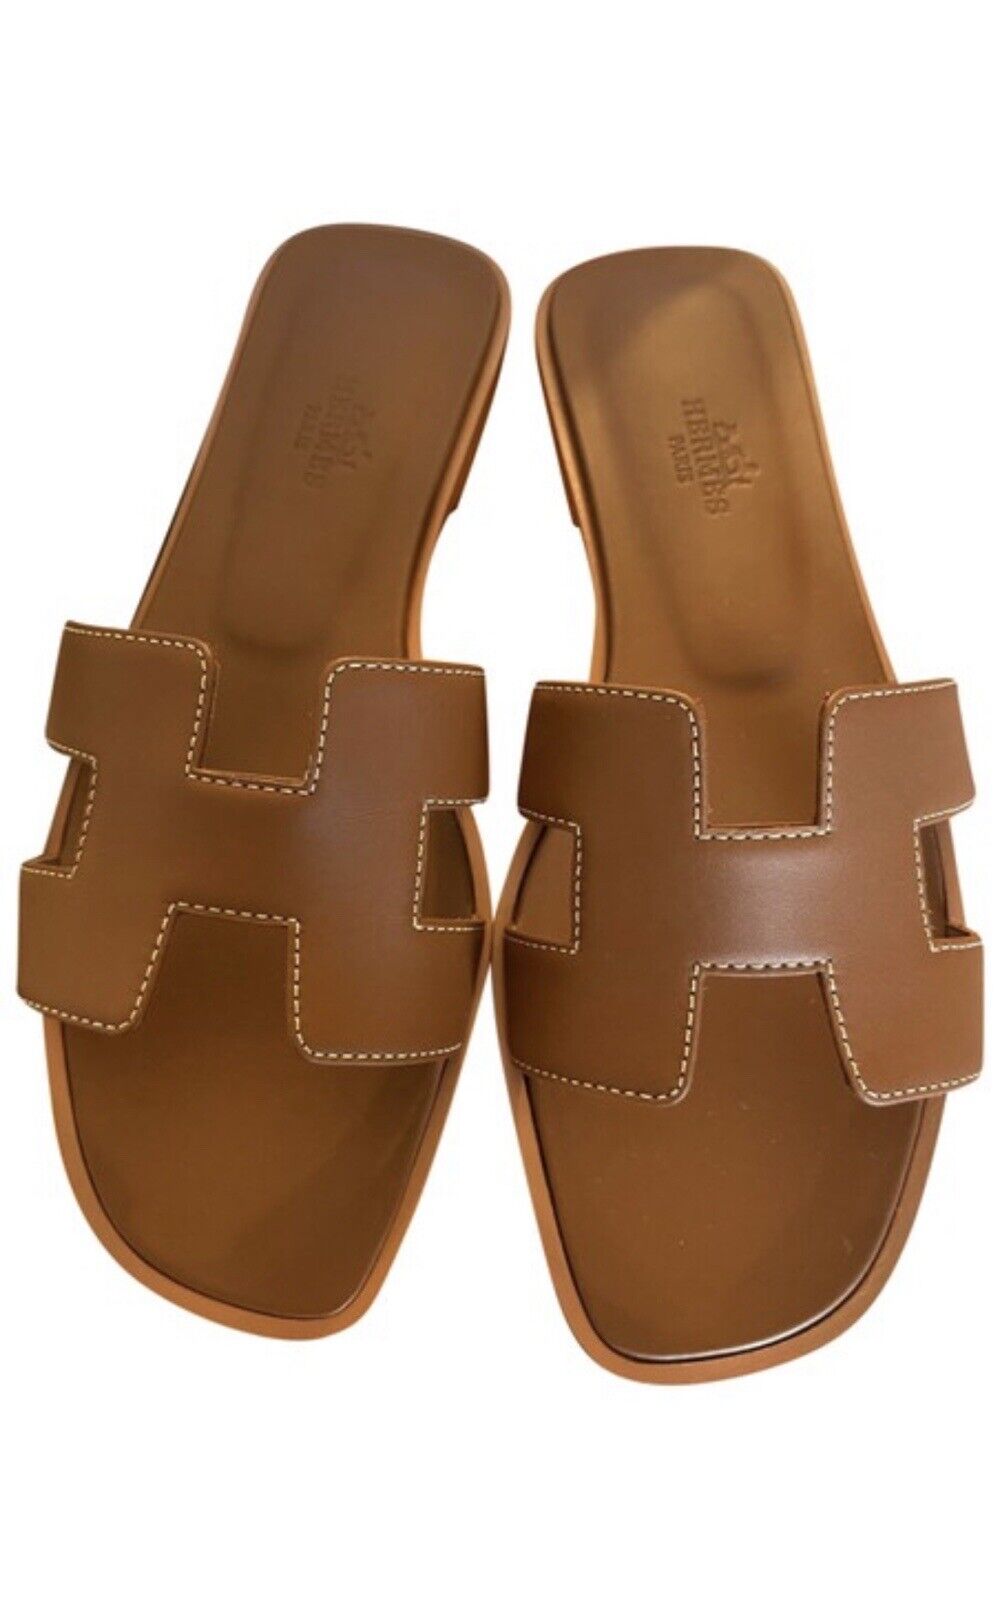 12 Pairs Of Sandals Inspired By Hermes | Le Chic Street